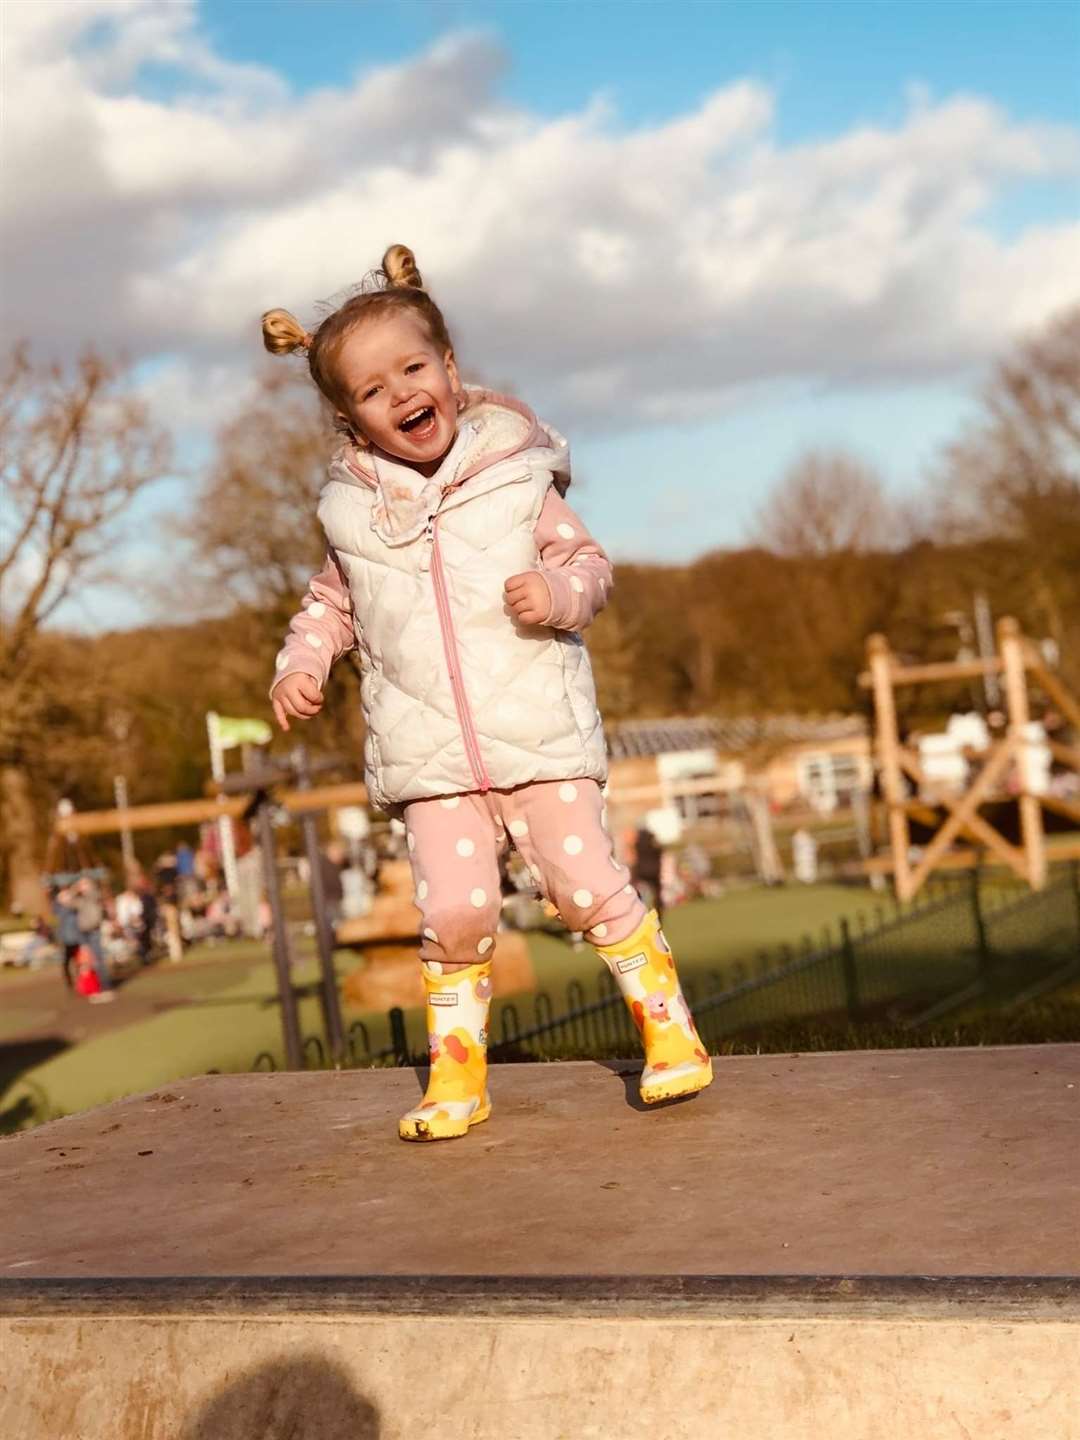 Mollie, 4, was diagnosed with the disease at 18 months old